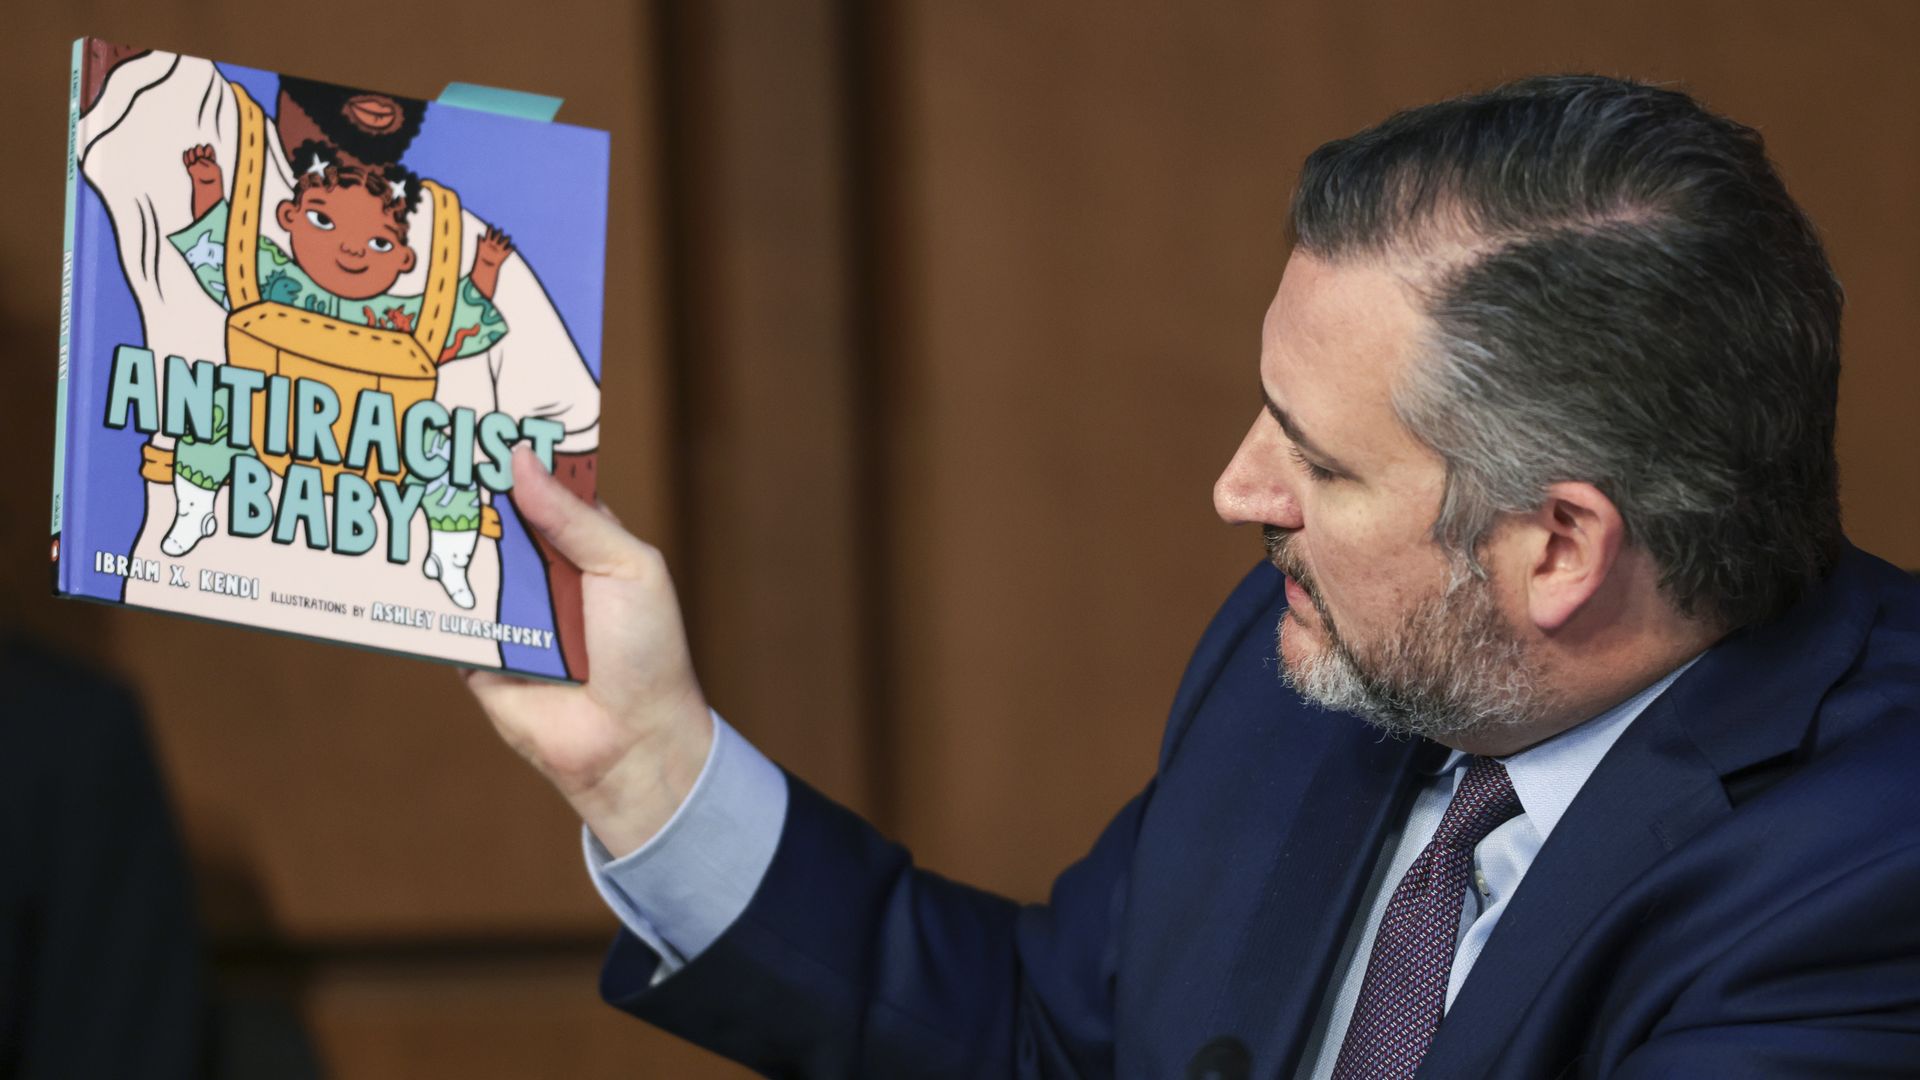 Sen. Ted Cruz is seen holding a book titled, 